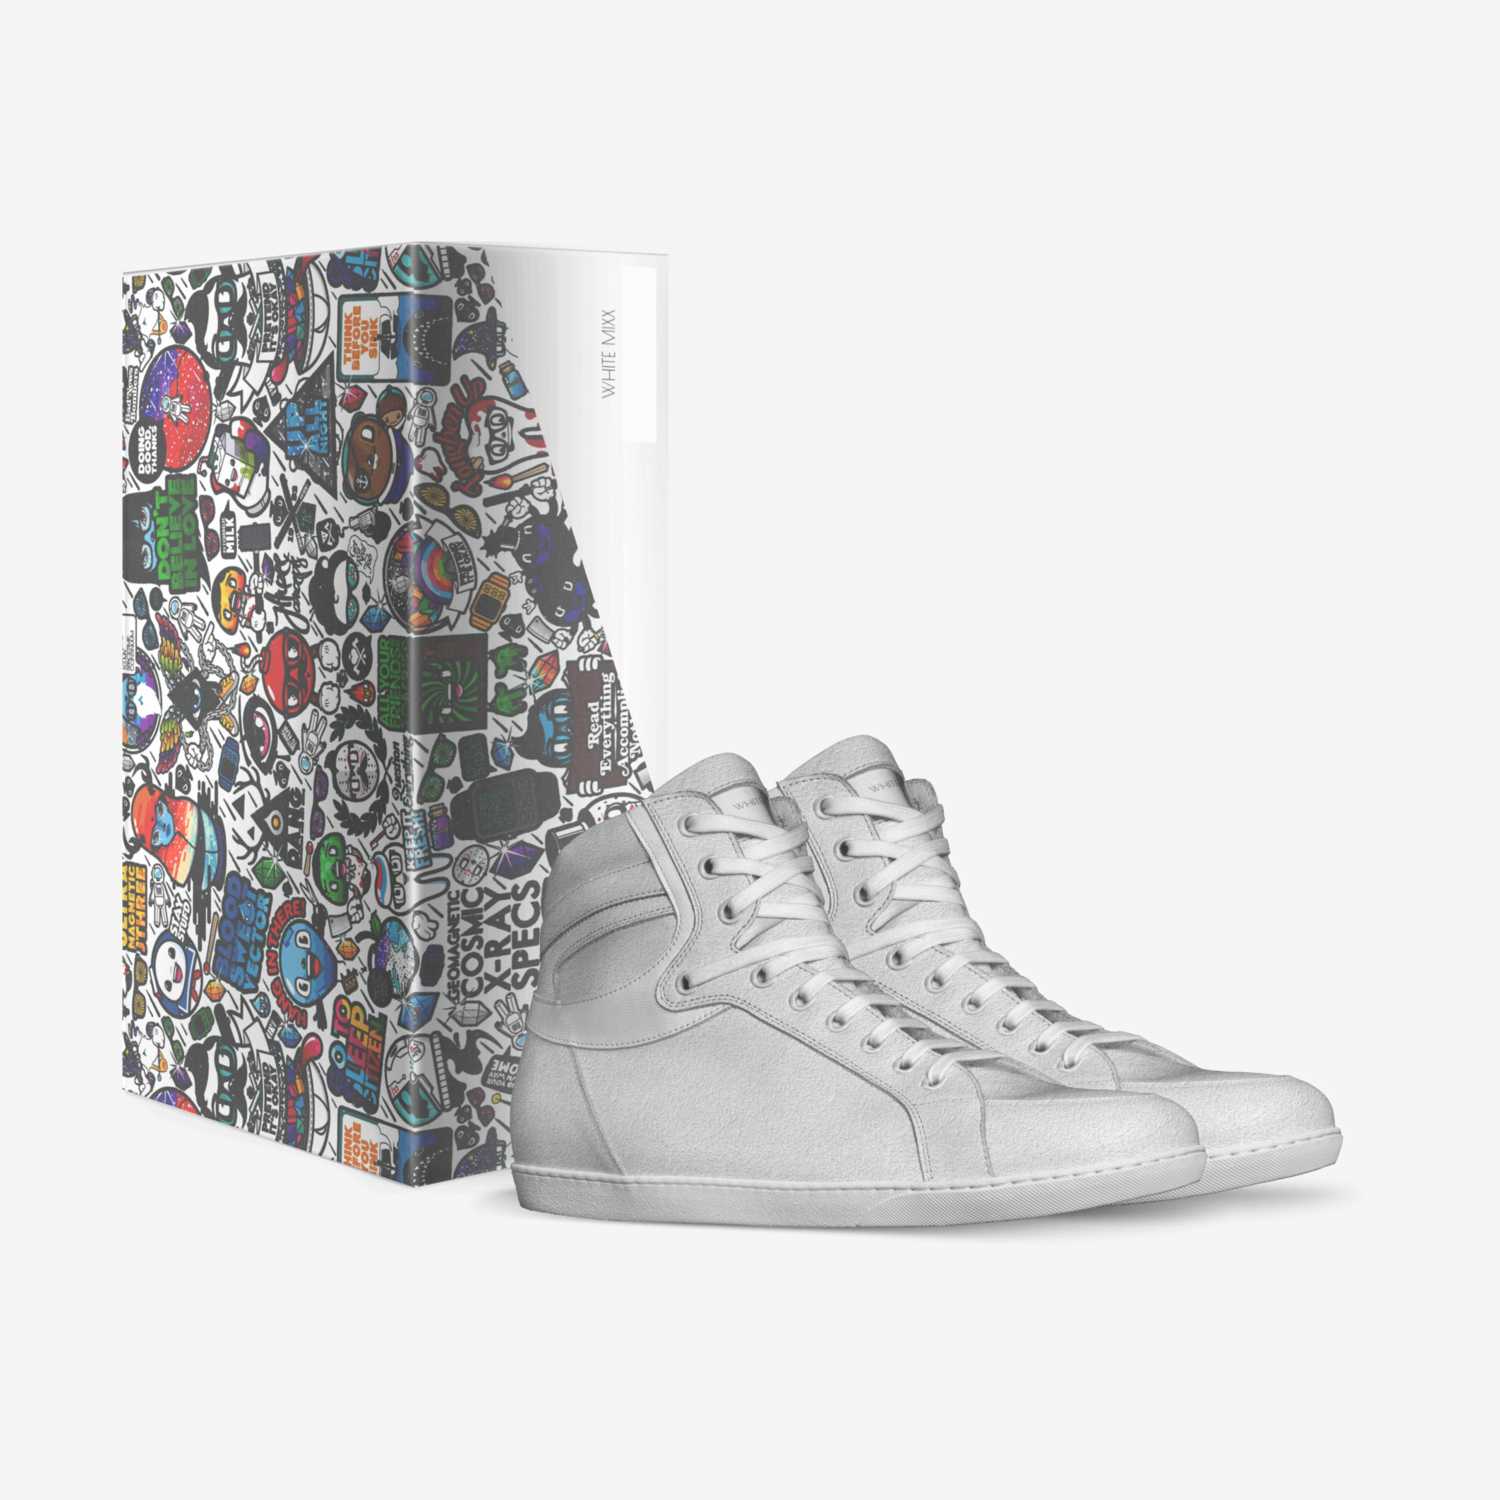 White Mixx custom made in Italy shoes by Alexander Bowie | Box view